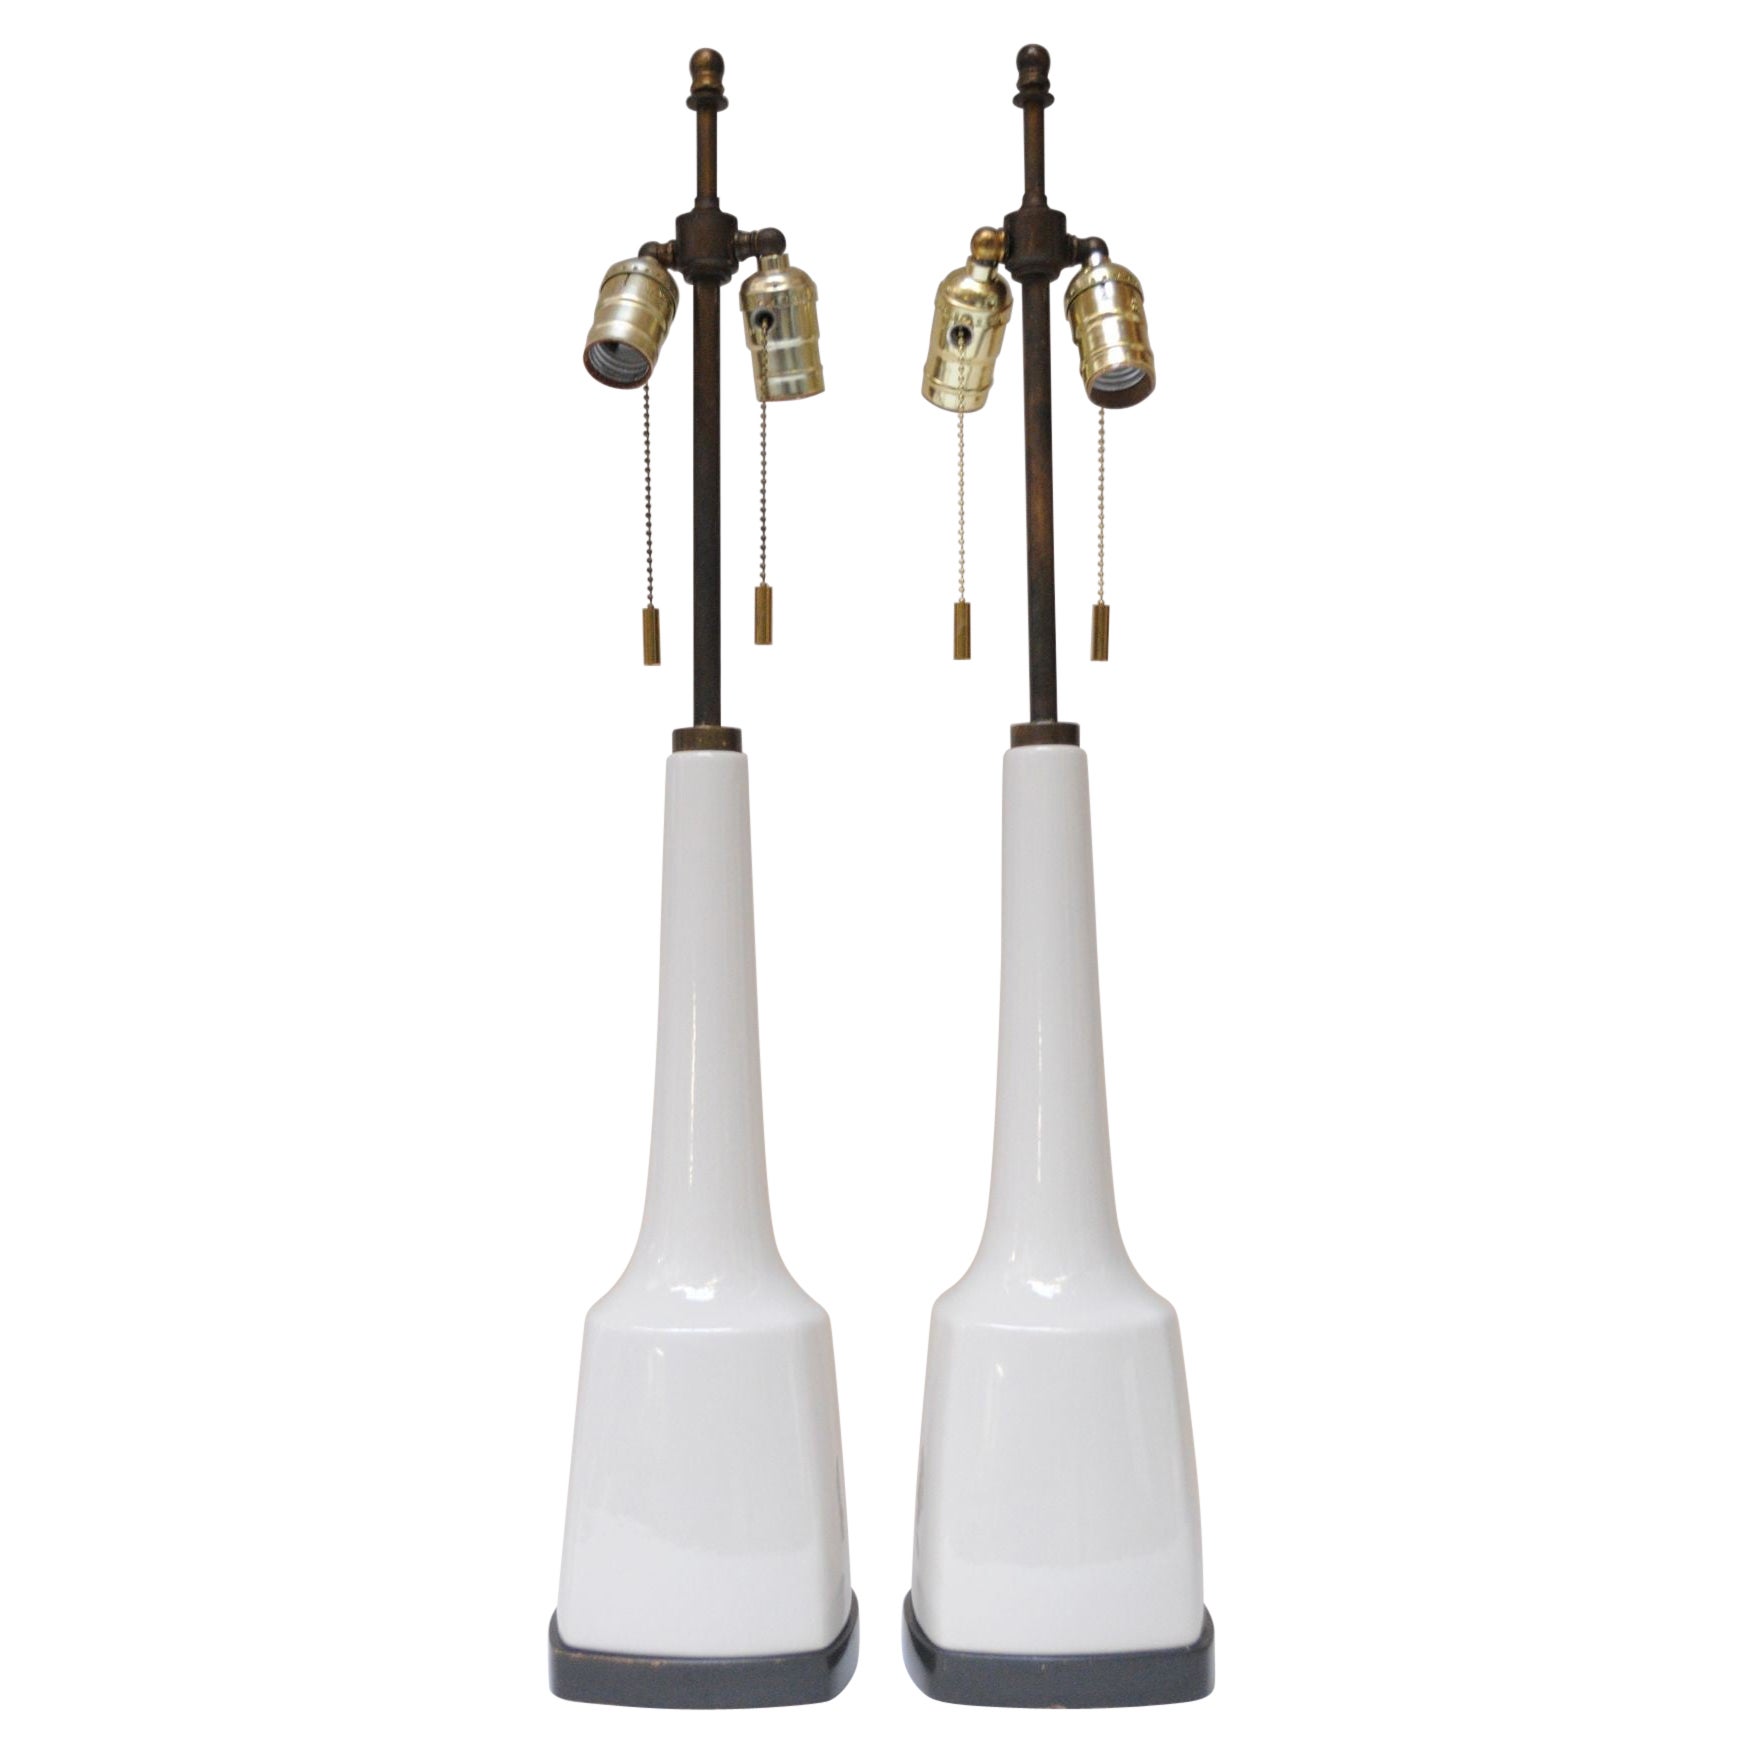 Pair of Tall American Modernist White Porcelain and Brass Tables Lamps